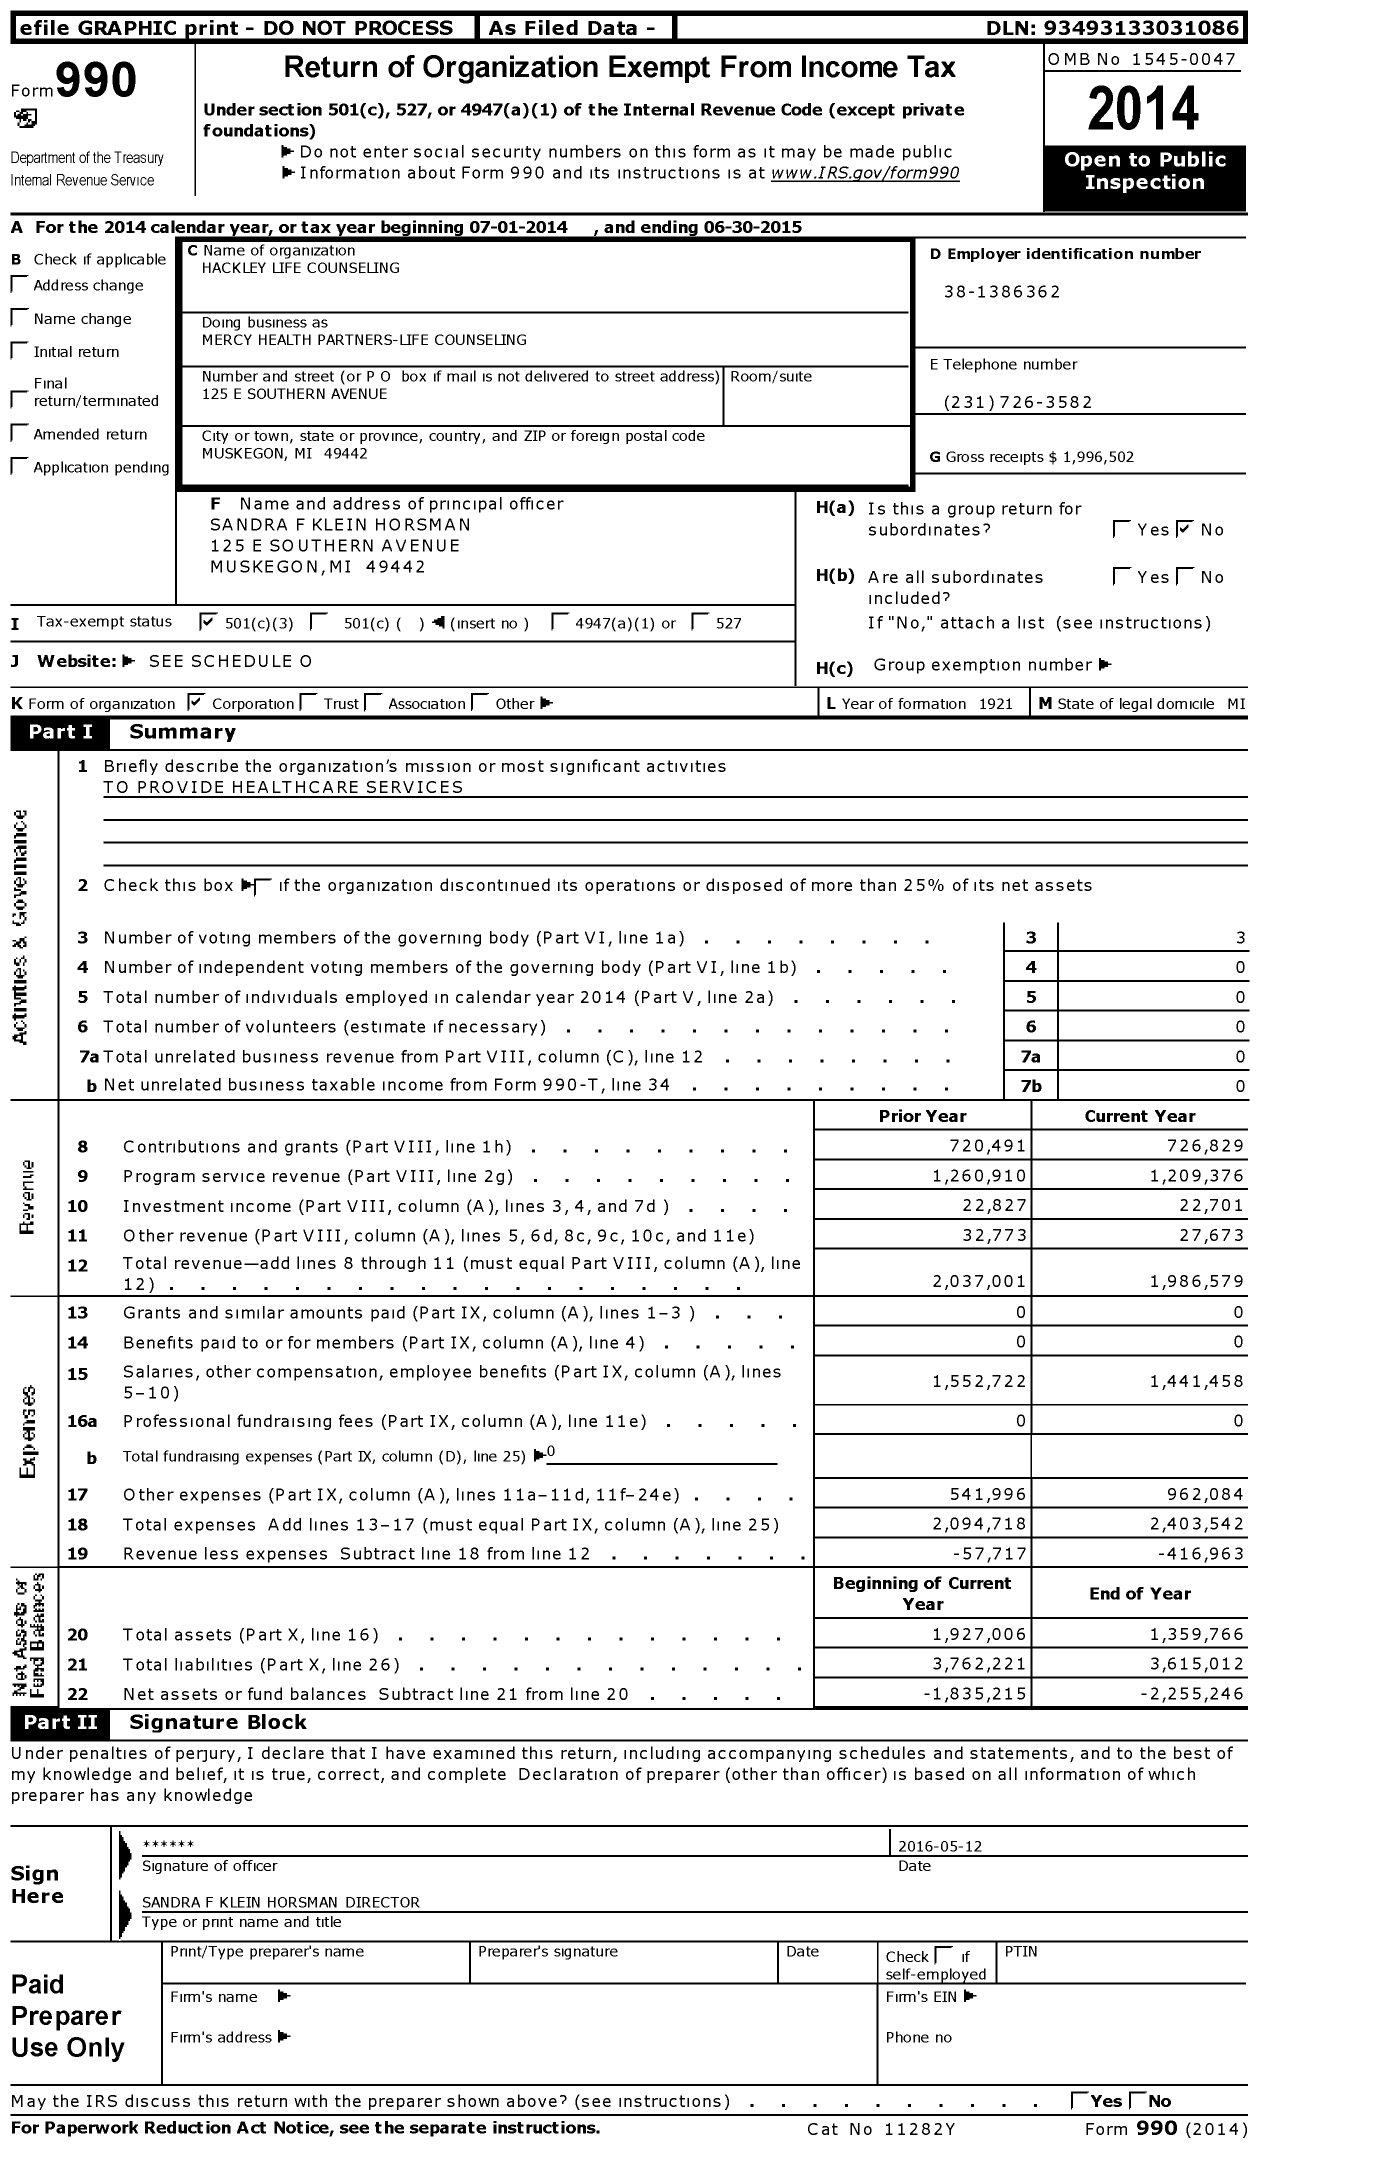 Image of first page of 2014 Form 990 for Hackley Life Counseling